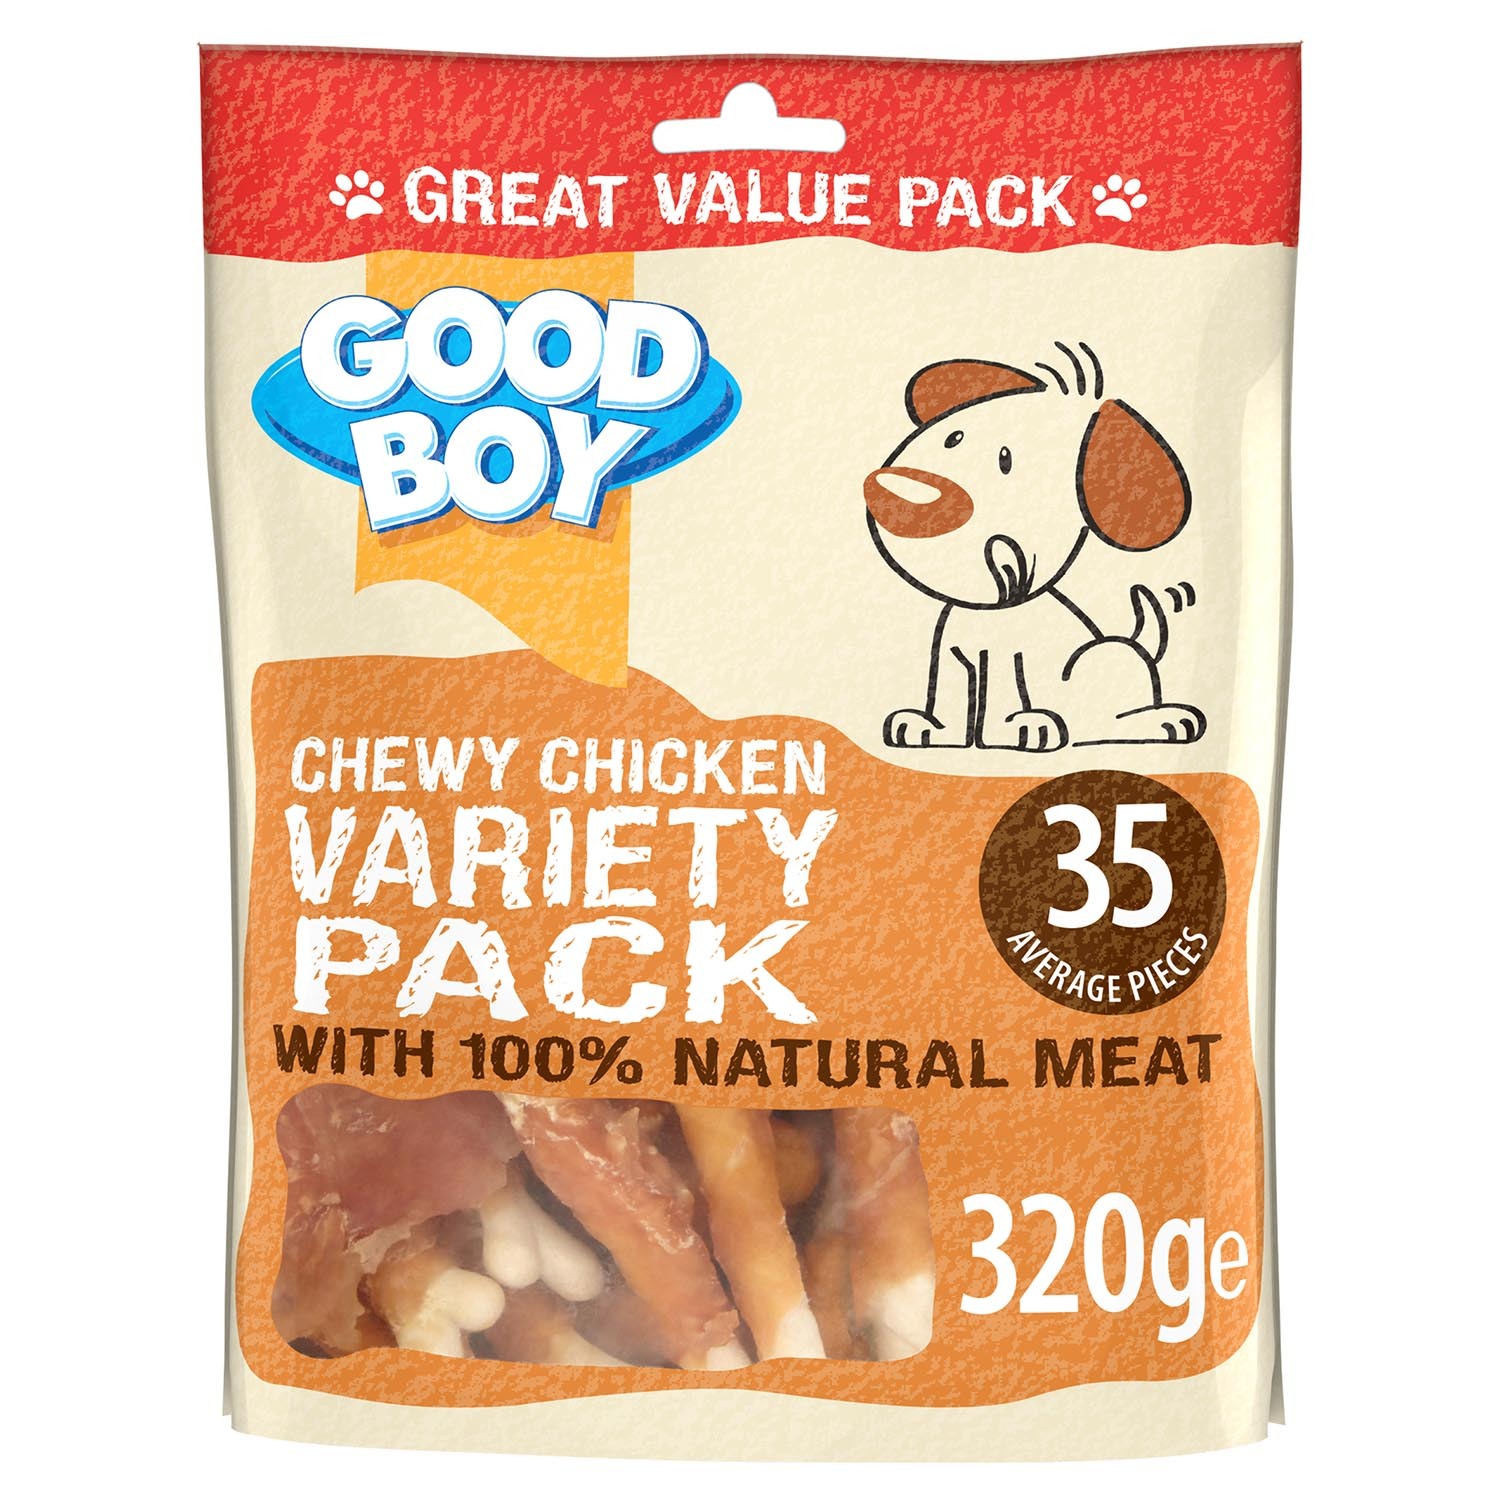 Good Boy Pawsley Variety Pack Chewy Chicken Dog Treat 320g Image 1